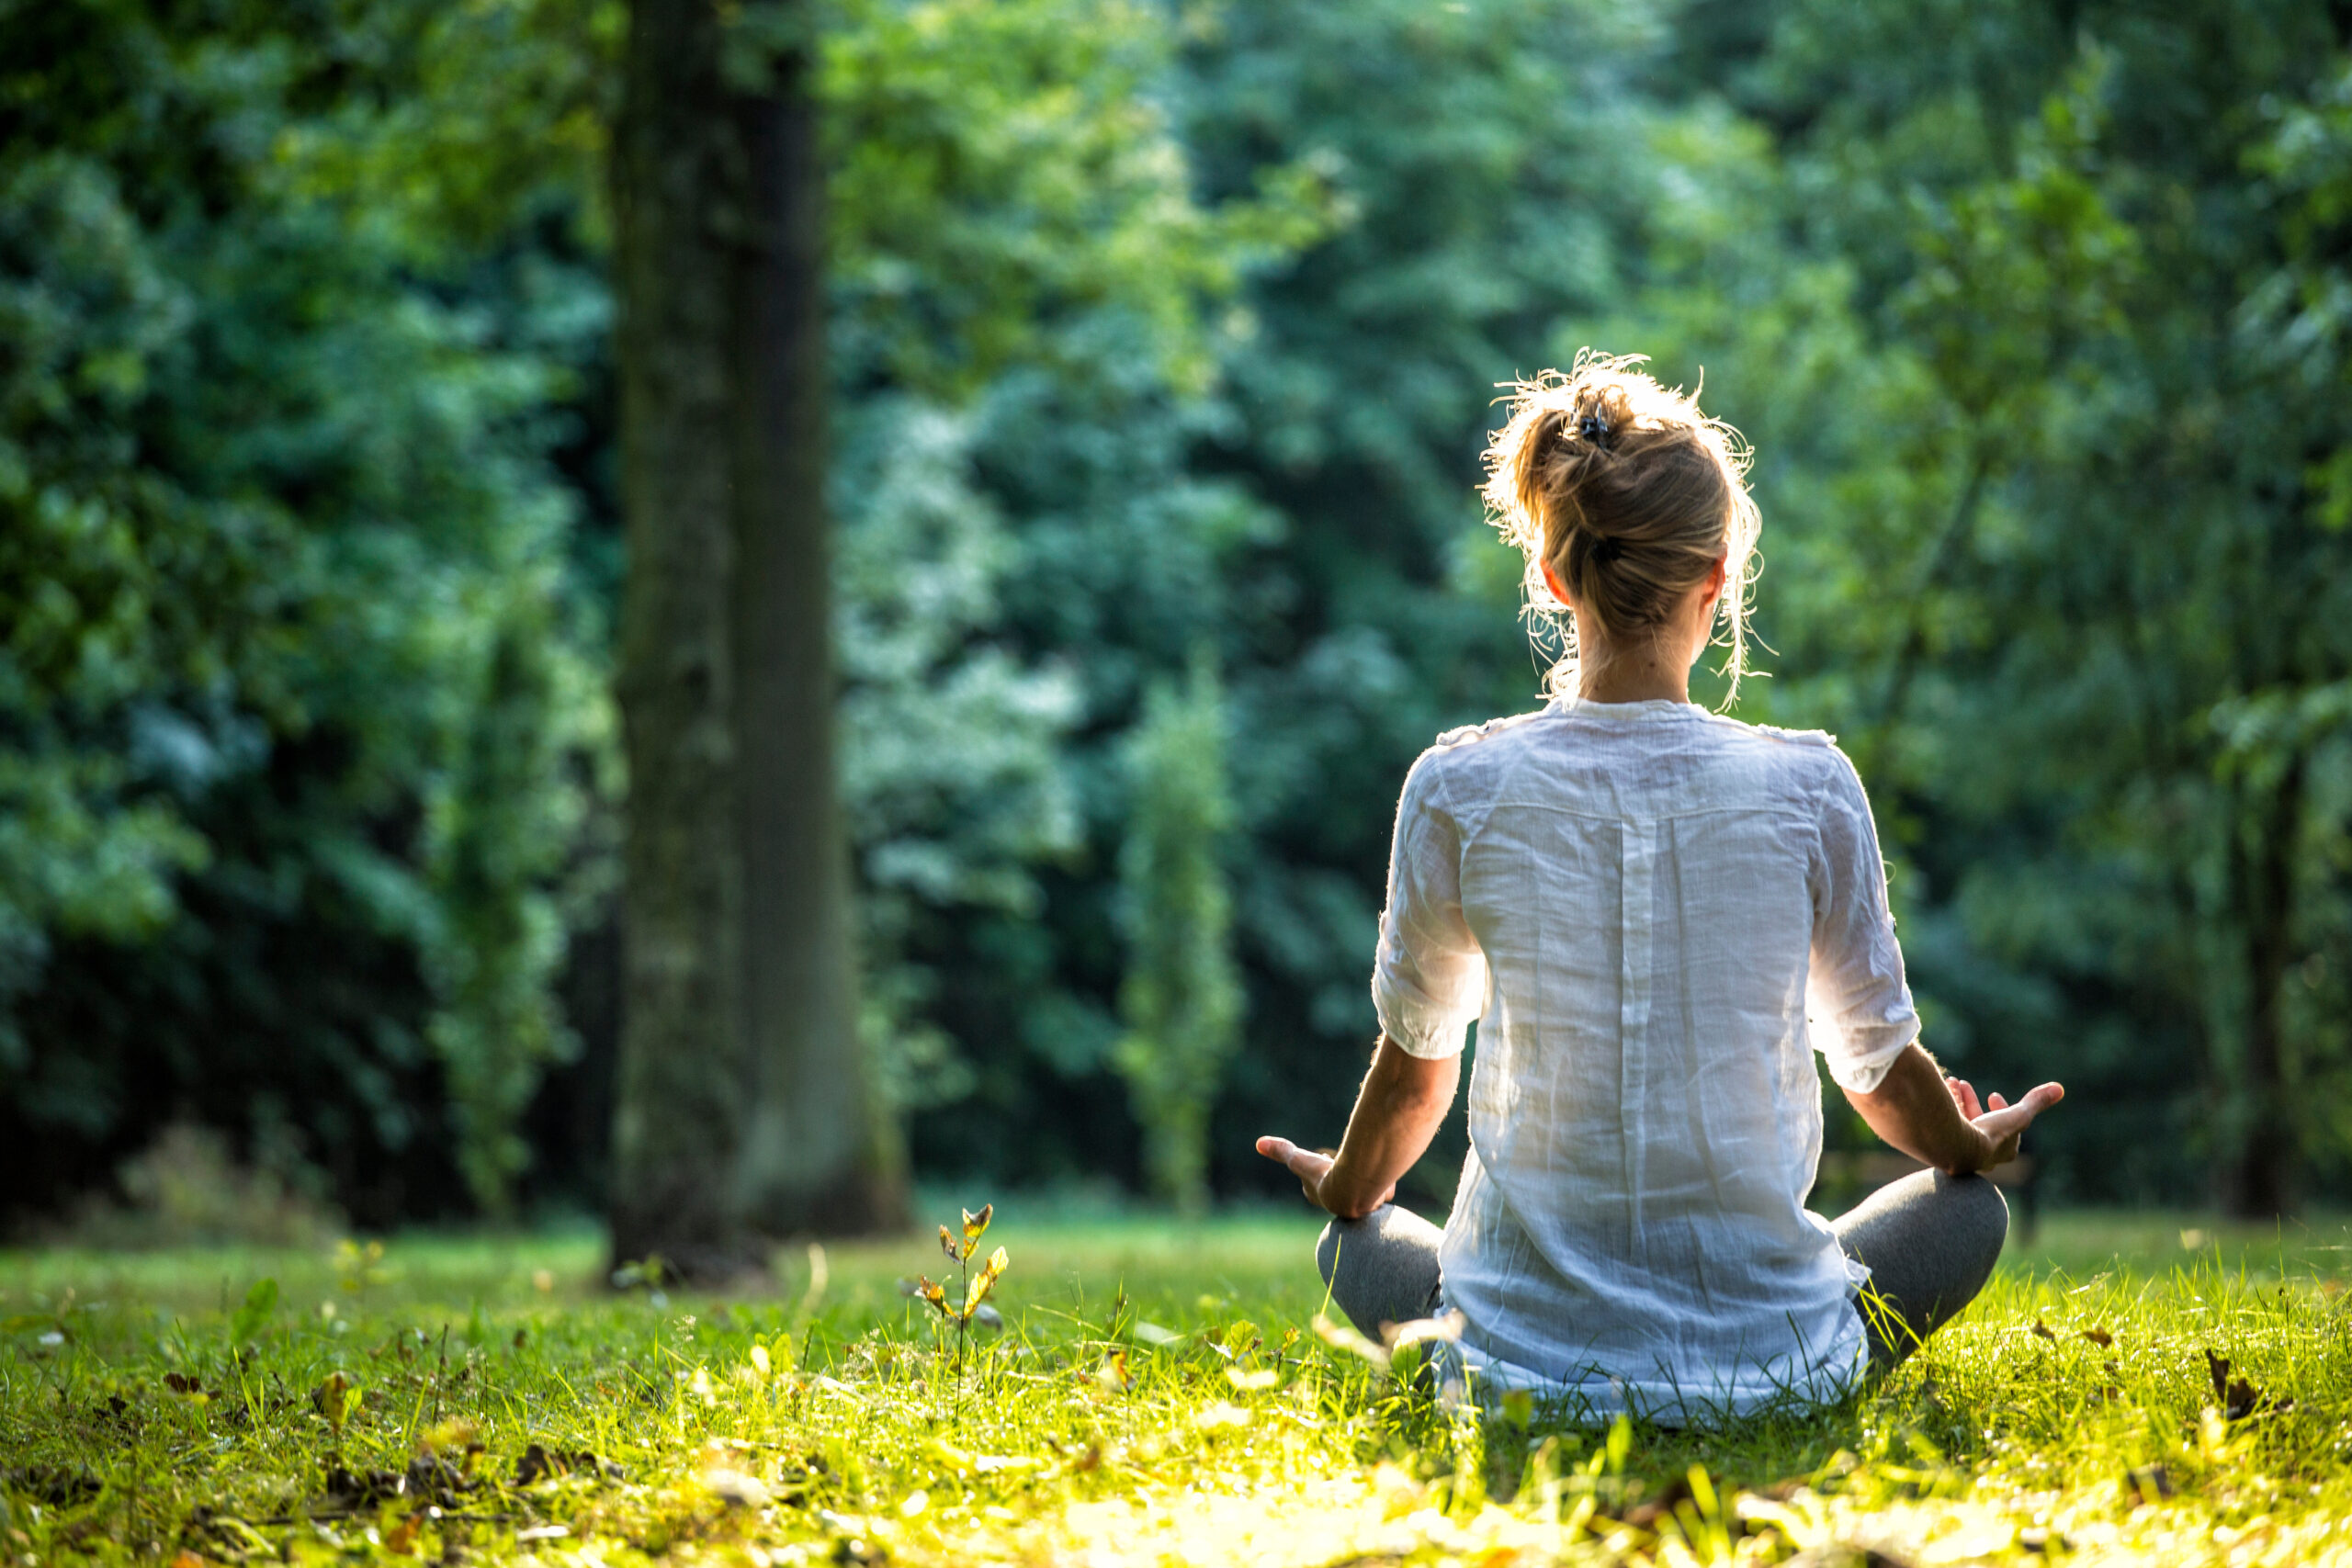 Where is it best to meditate?